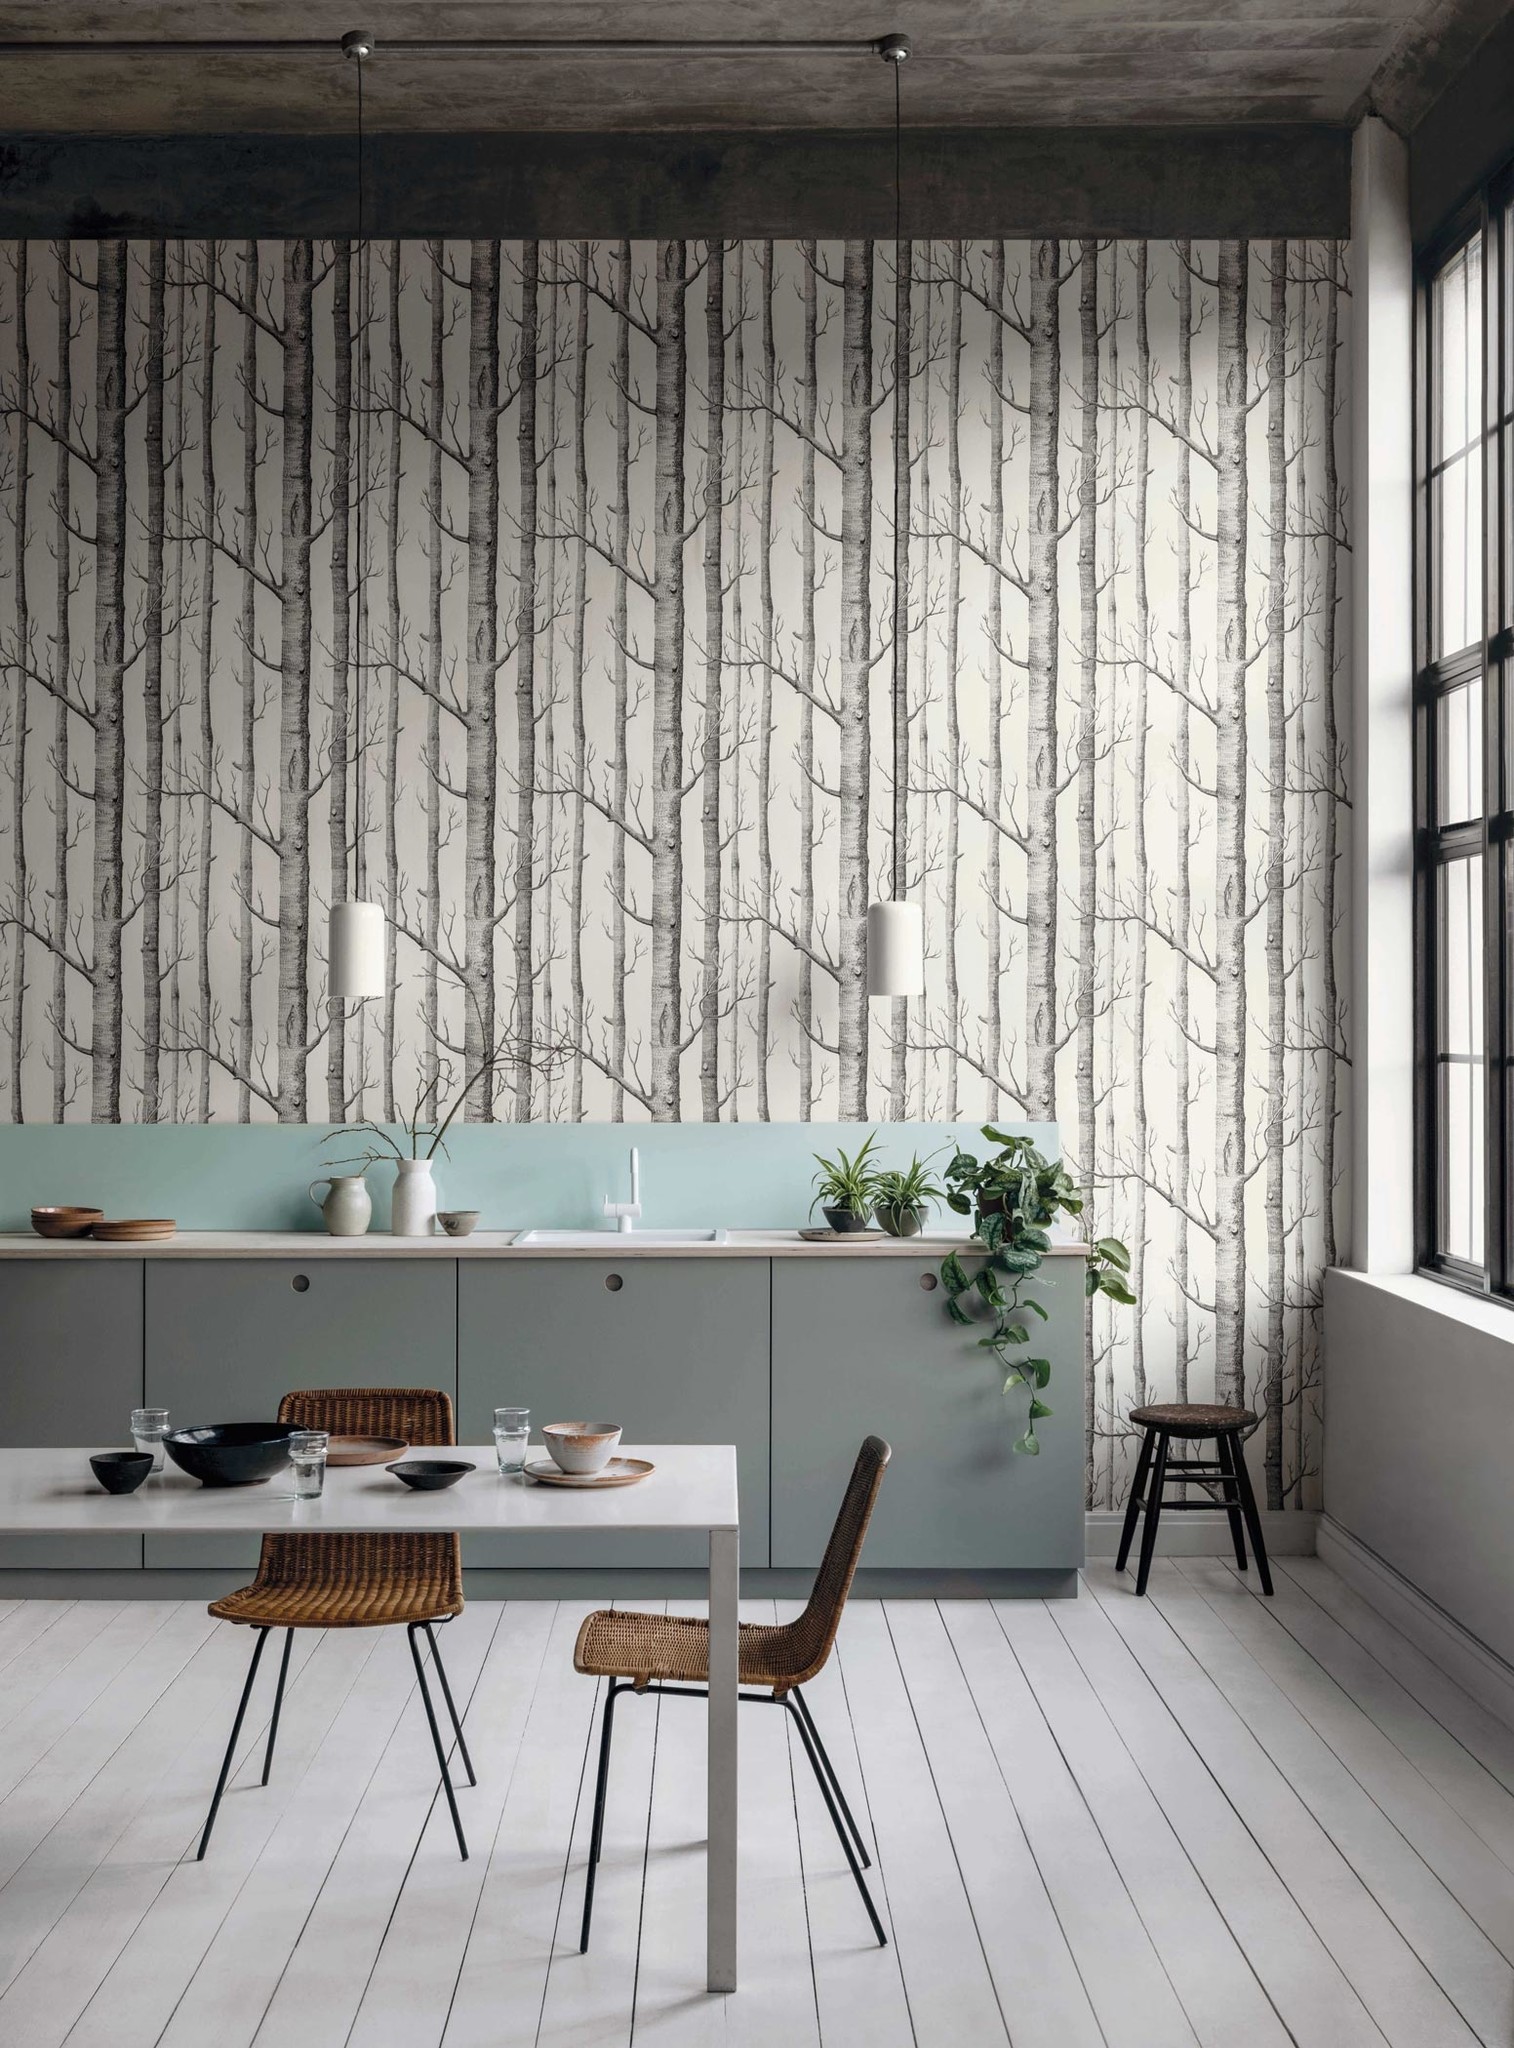 Cole and Son Wallpaper  40 Off Free Shipping Samples